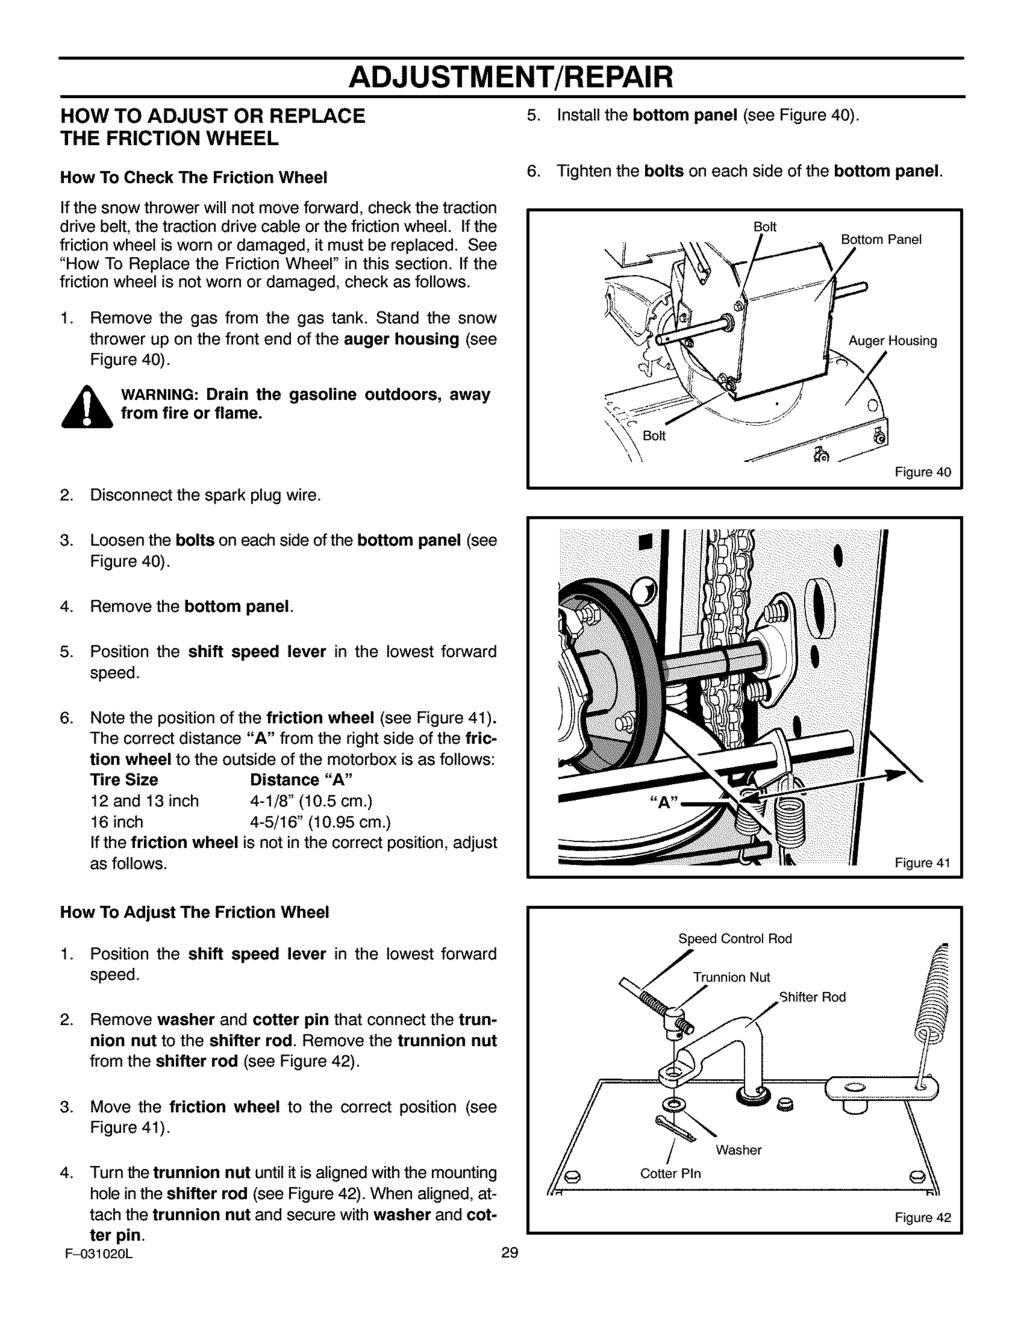 ADJUSTMENT/REPAIR HOW TO ADJUST OR REPLACE THE FRICTION WHEEL 5. Install the bottom panel (see Figure 40). How To Check The Friction Wheel 6. Tighten the bolts on each side of the bottom panel.